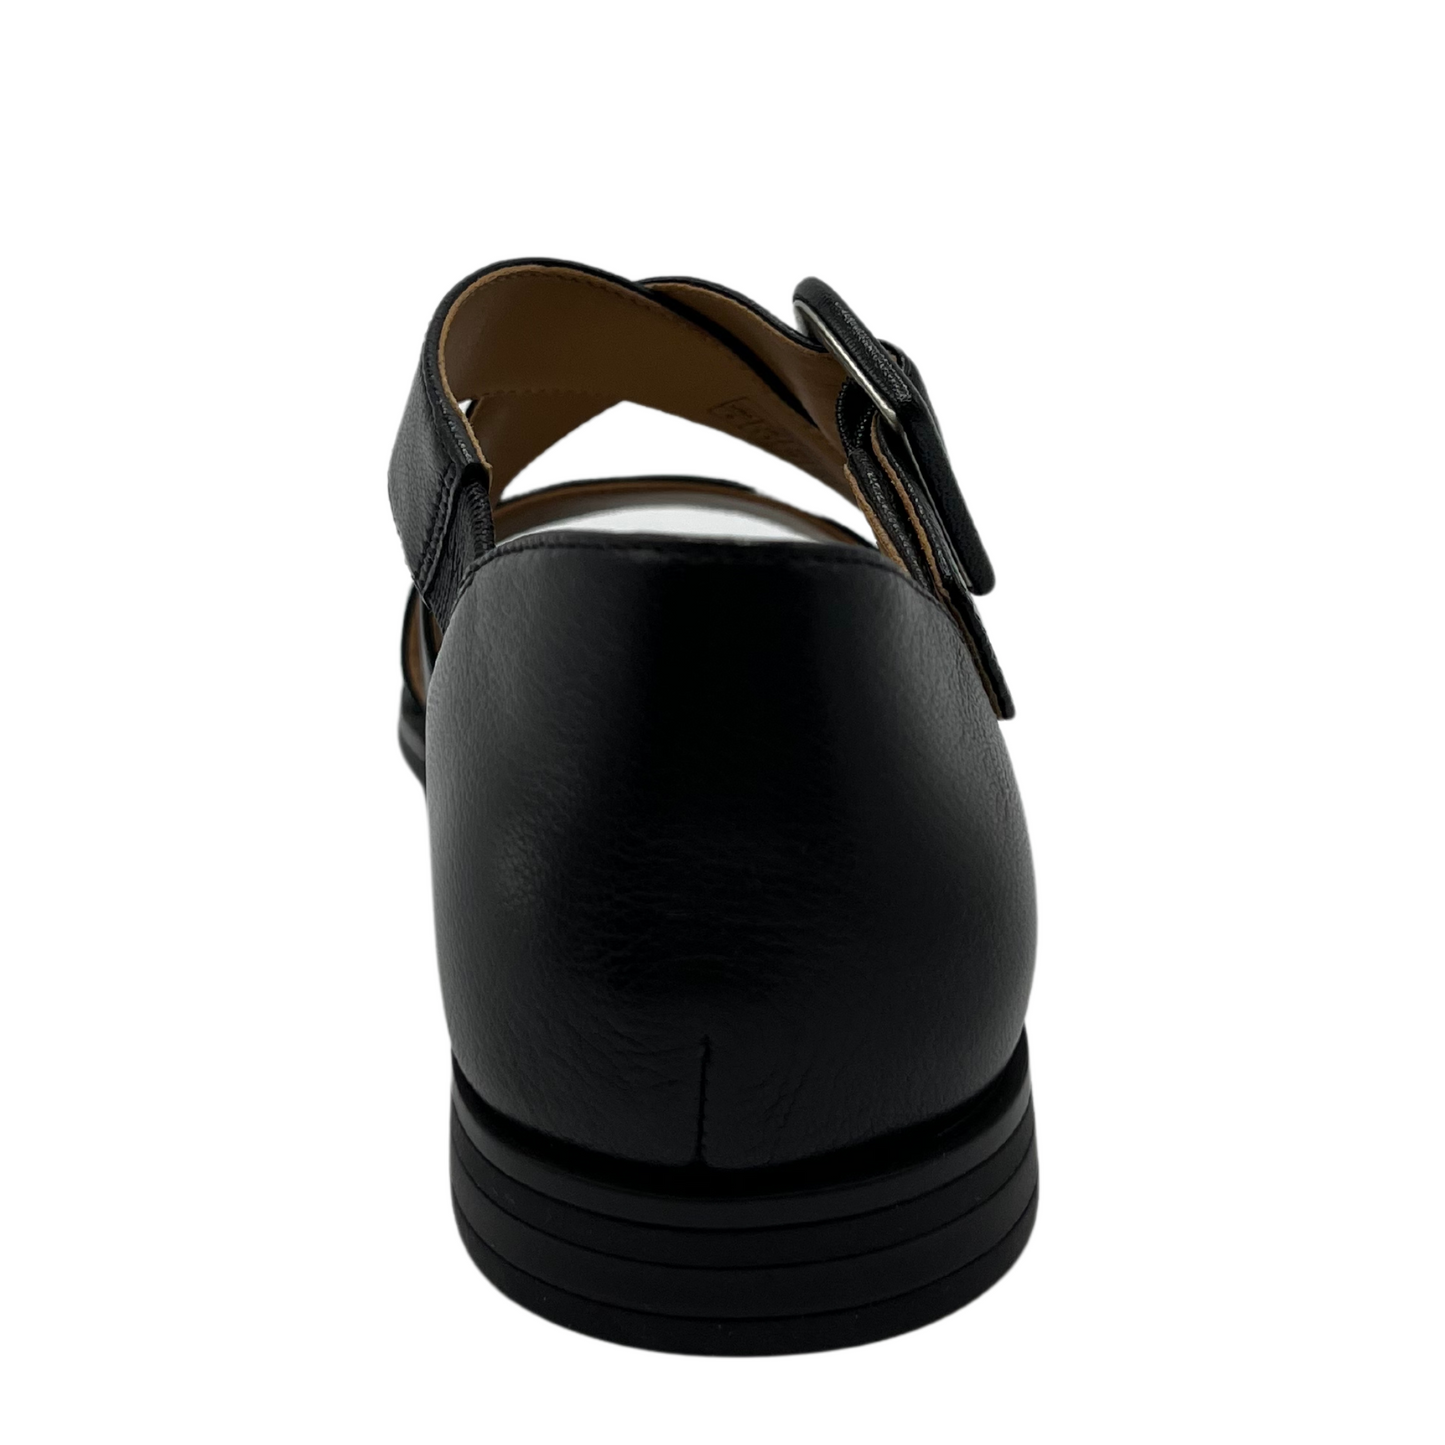 Back view of black leather sandal with low heel and matching buckle